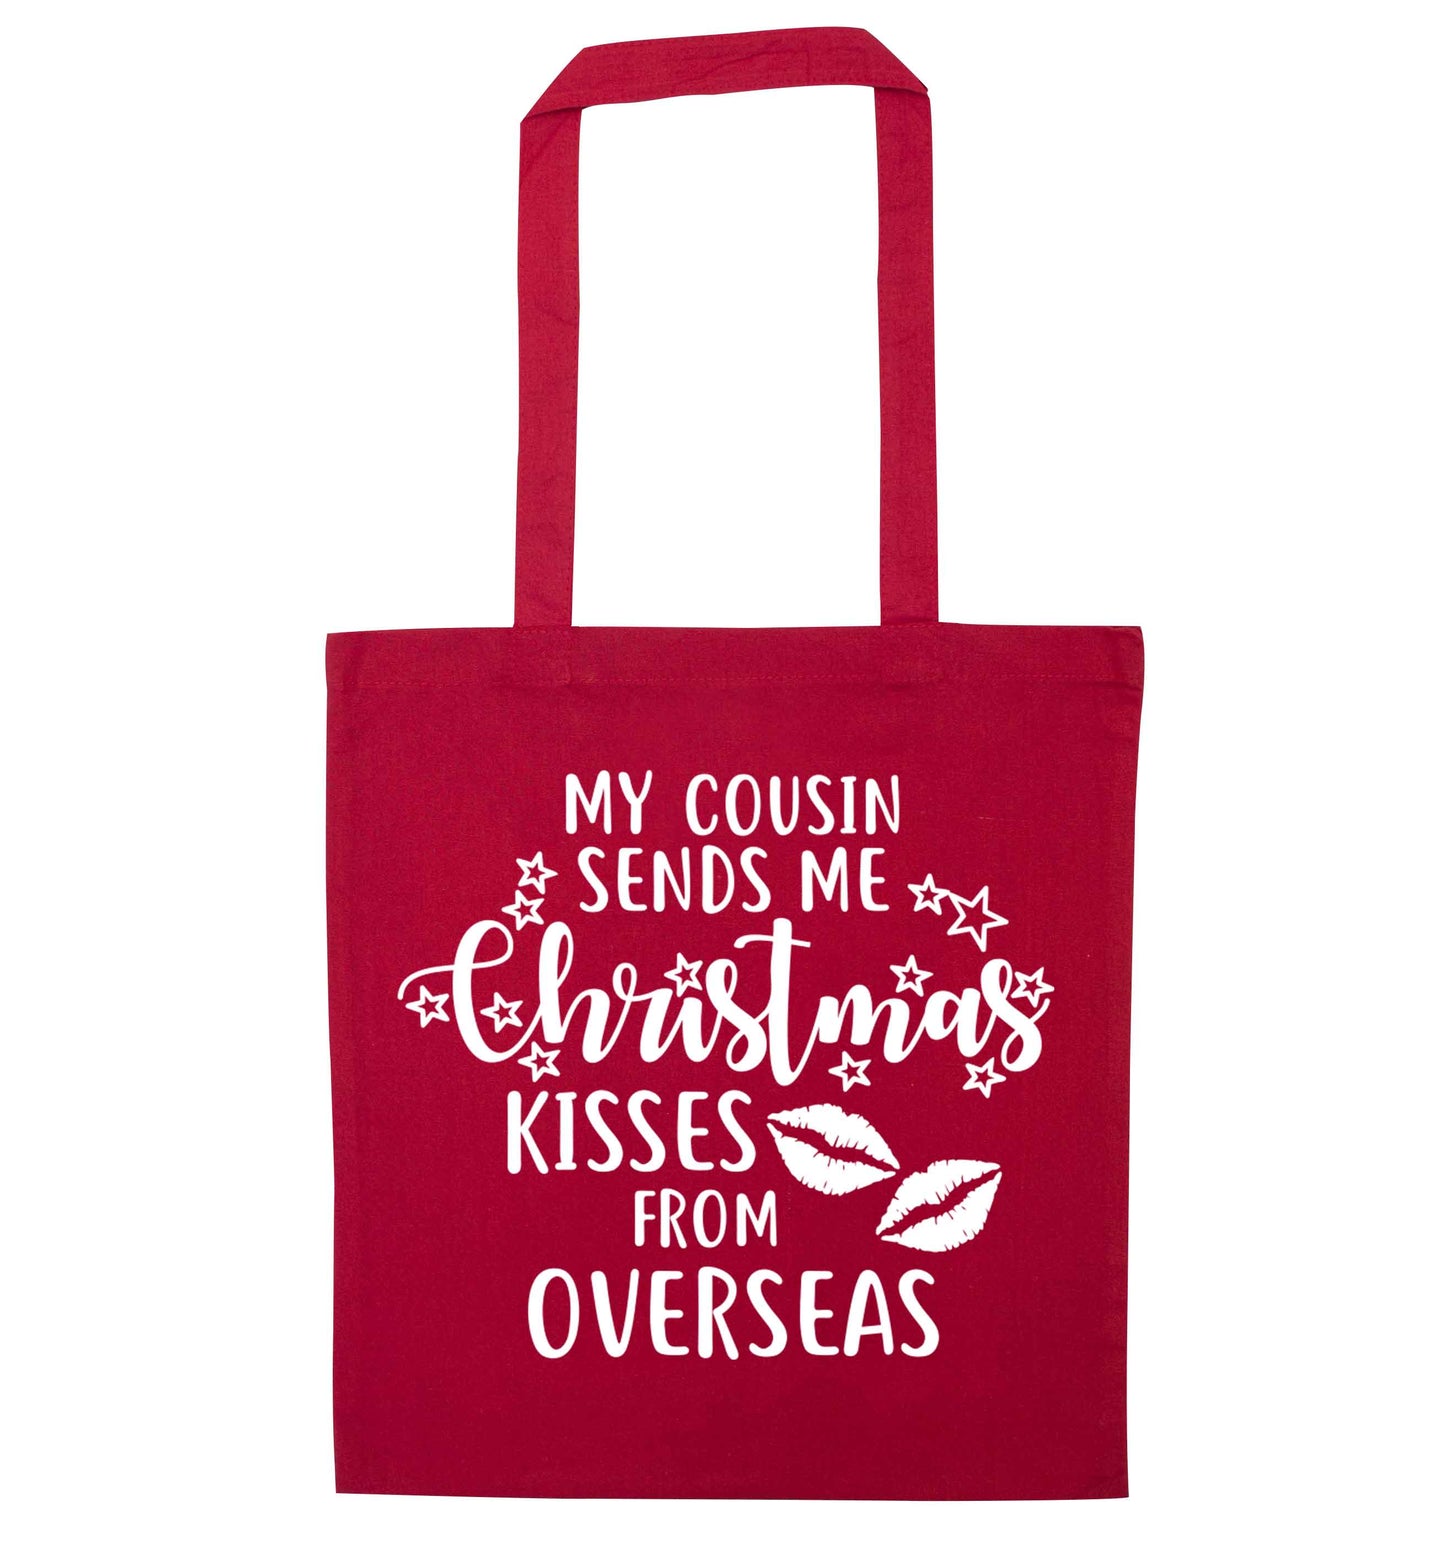 Auntie Christmas Kisses Overseas red tote bag